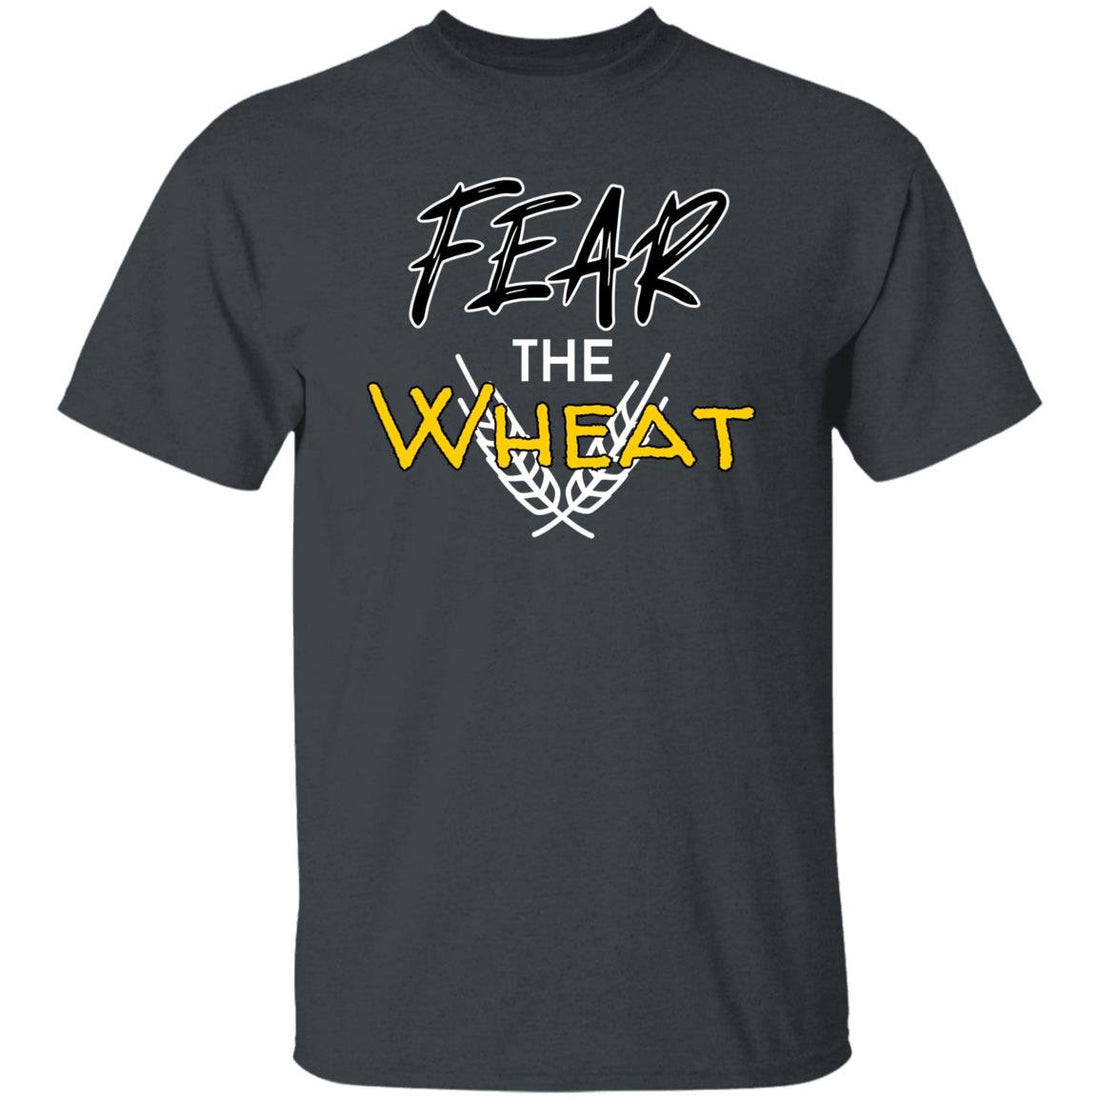 Fear The Wheat T-Shirt - T-Shirts - Positively Sassy - Fear The Wheat T-Shirt